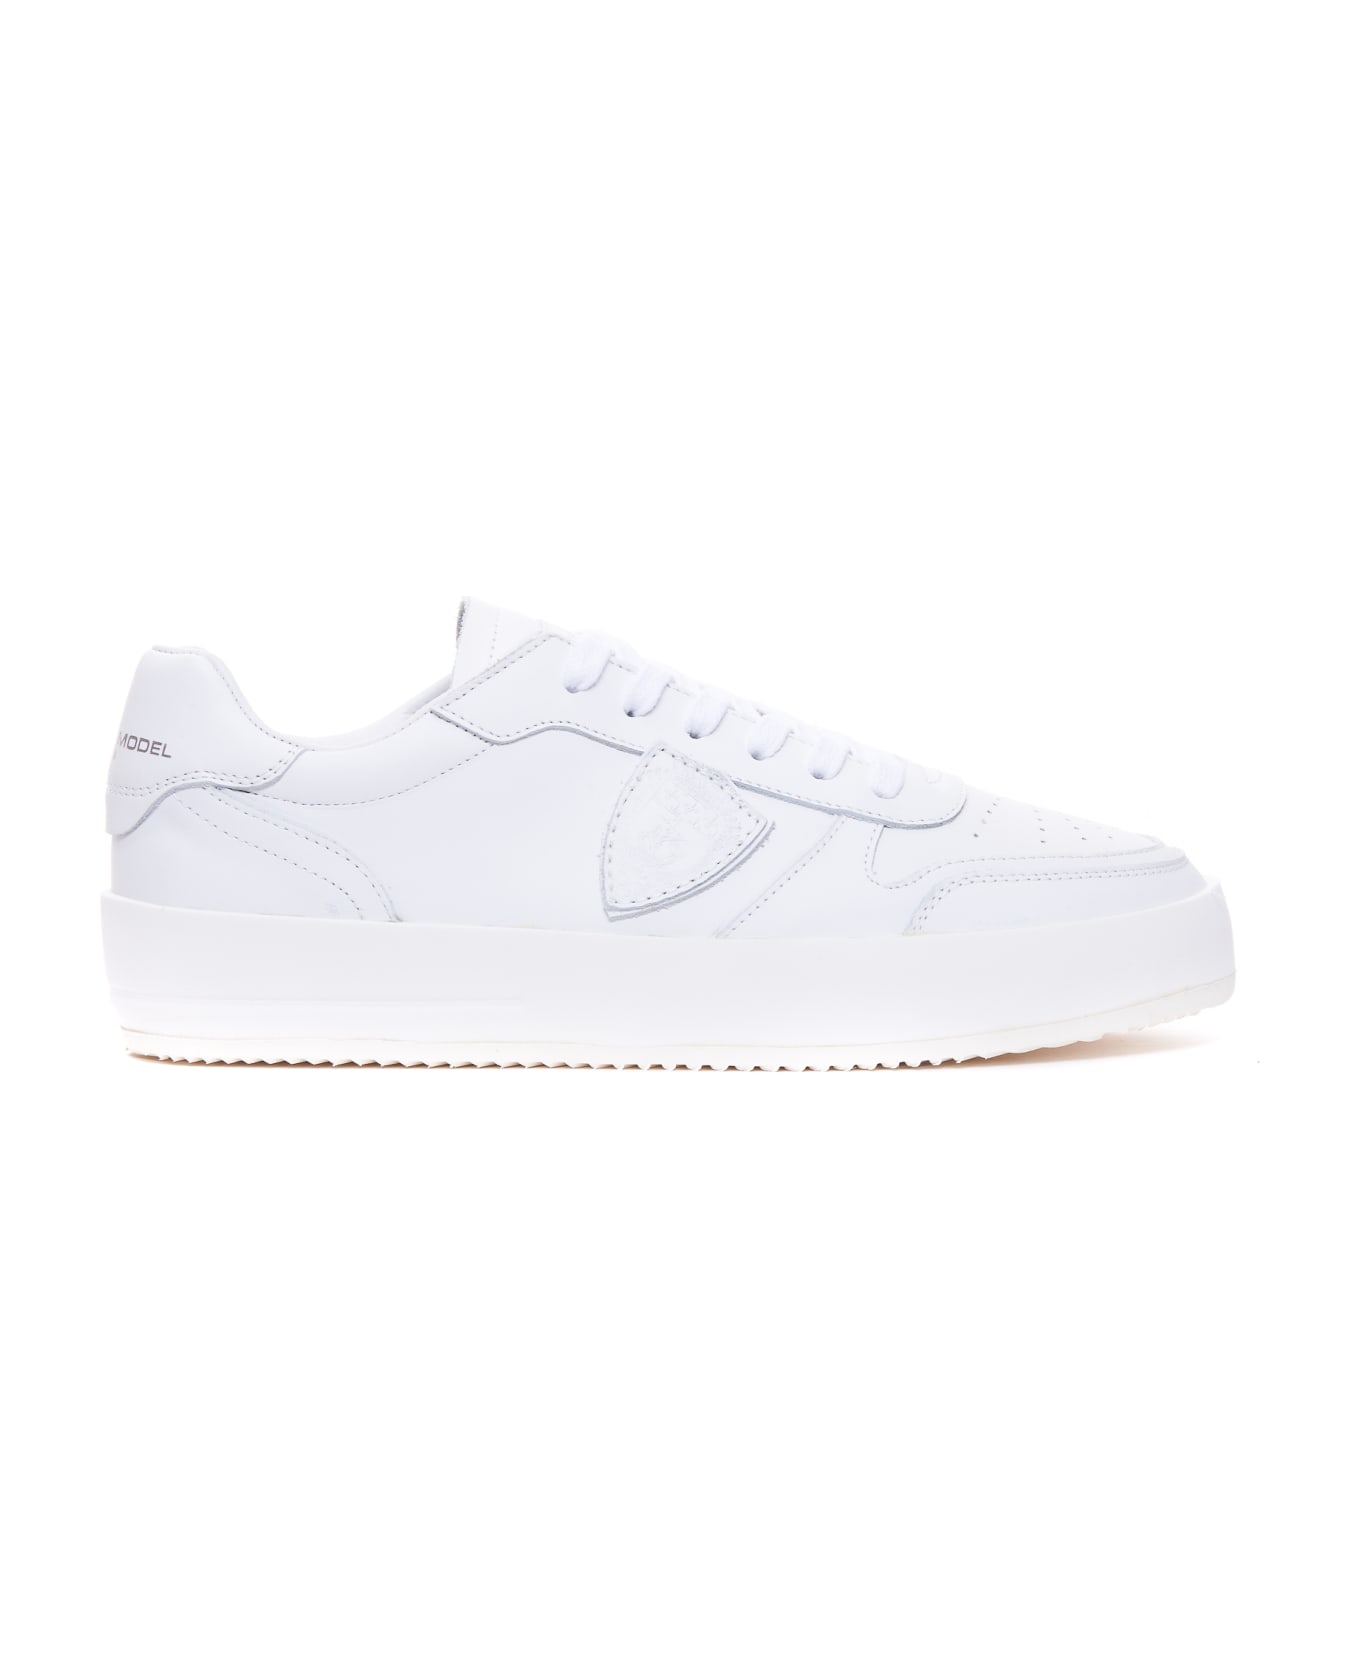 Philippe Model Nice Low Sneakers - White